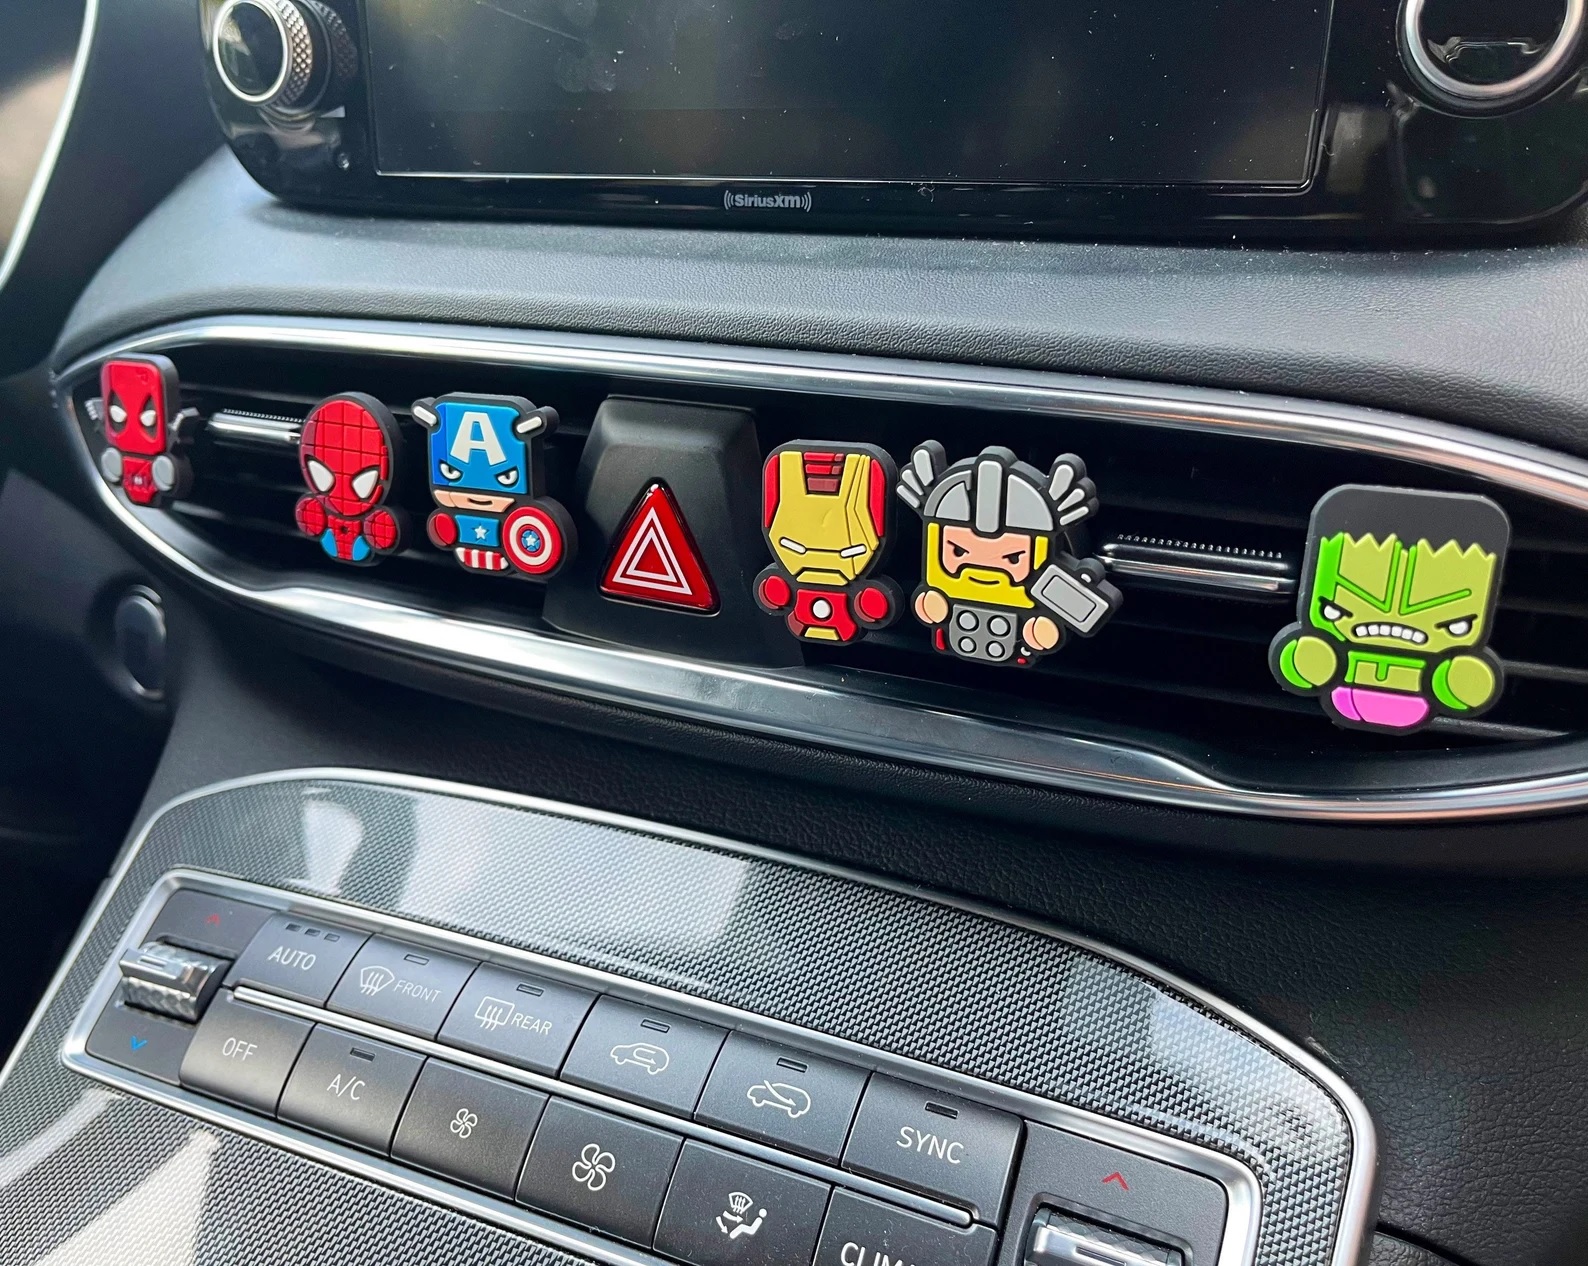 Small air fresheners, shaped like stylized images of popular Marvel heroes, clipped to a car's air conditioner